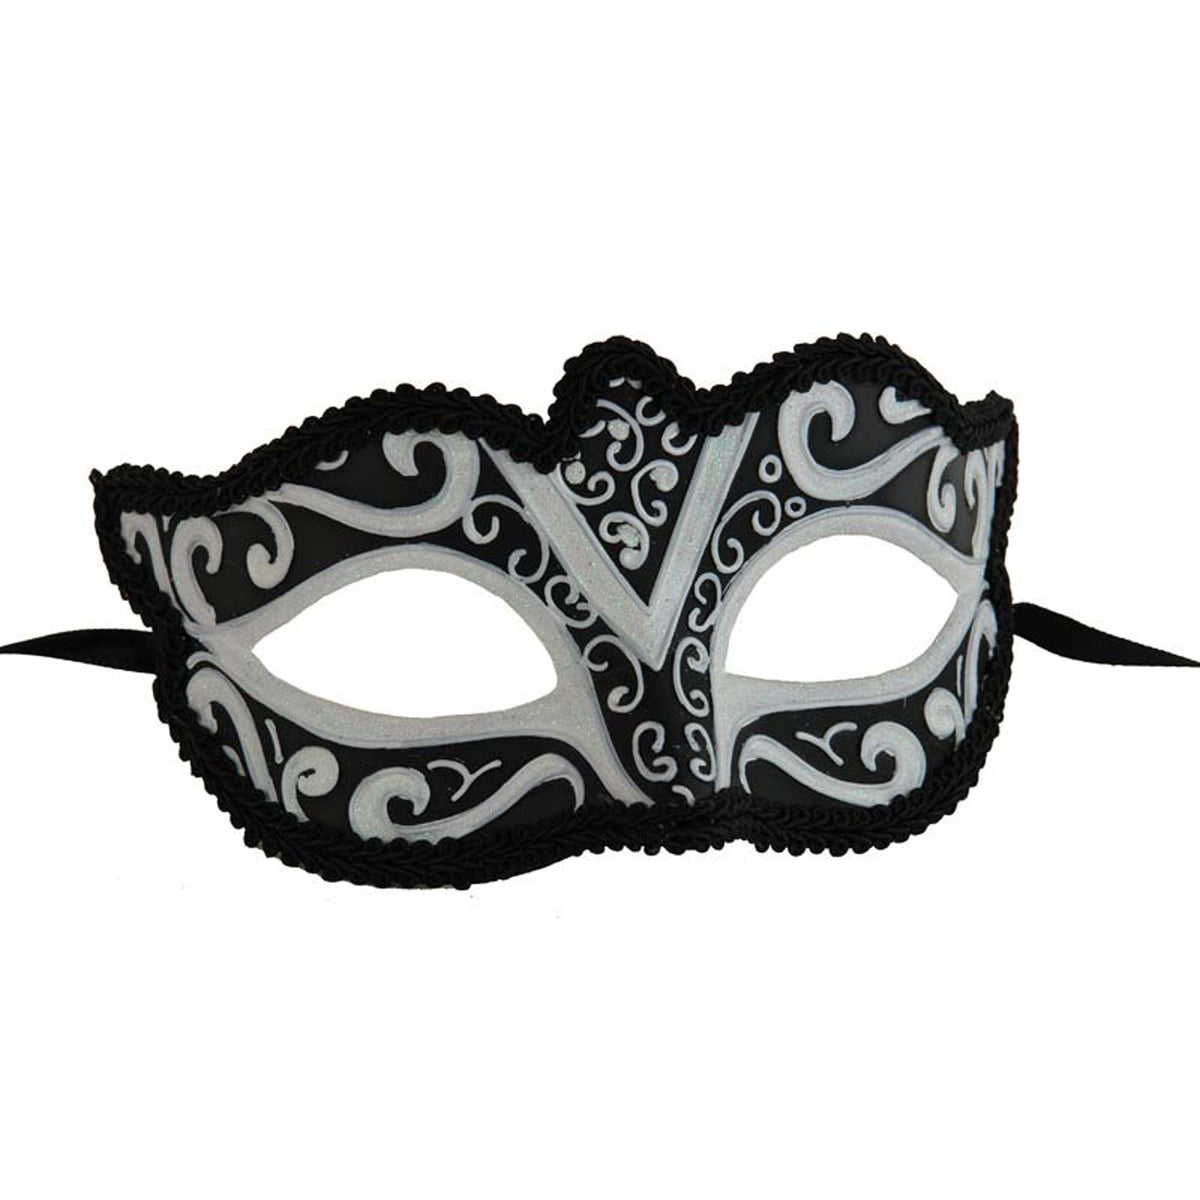 KBW GLOBAL CORP Costume Accessories Venitian Mask Black and Silver 831687021305